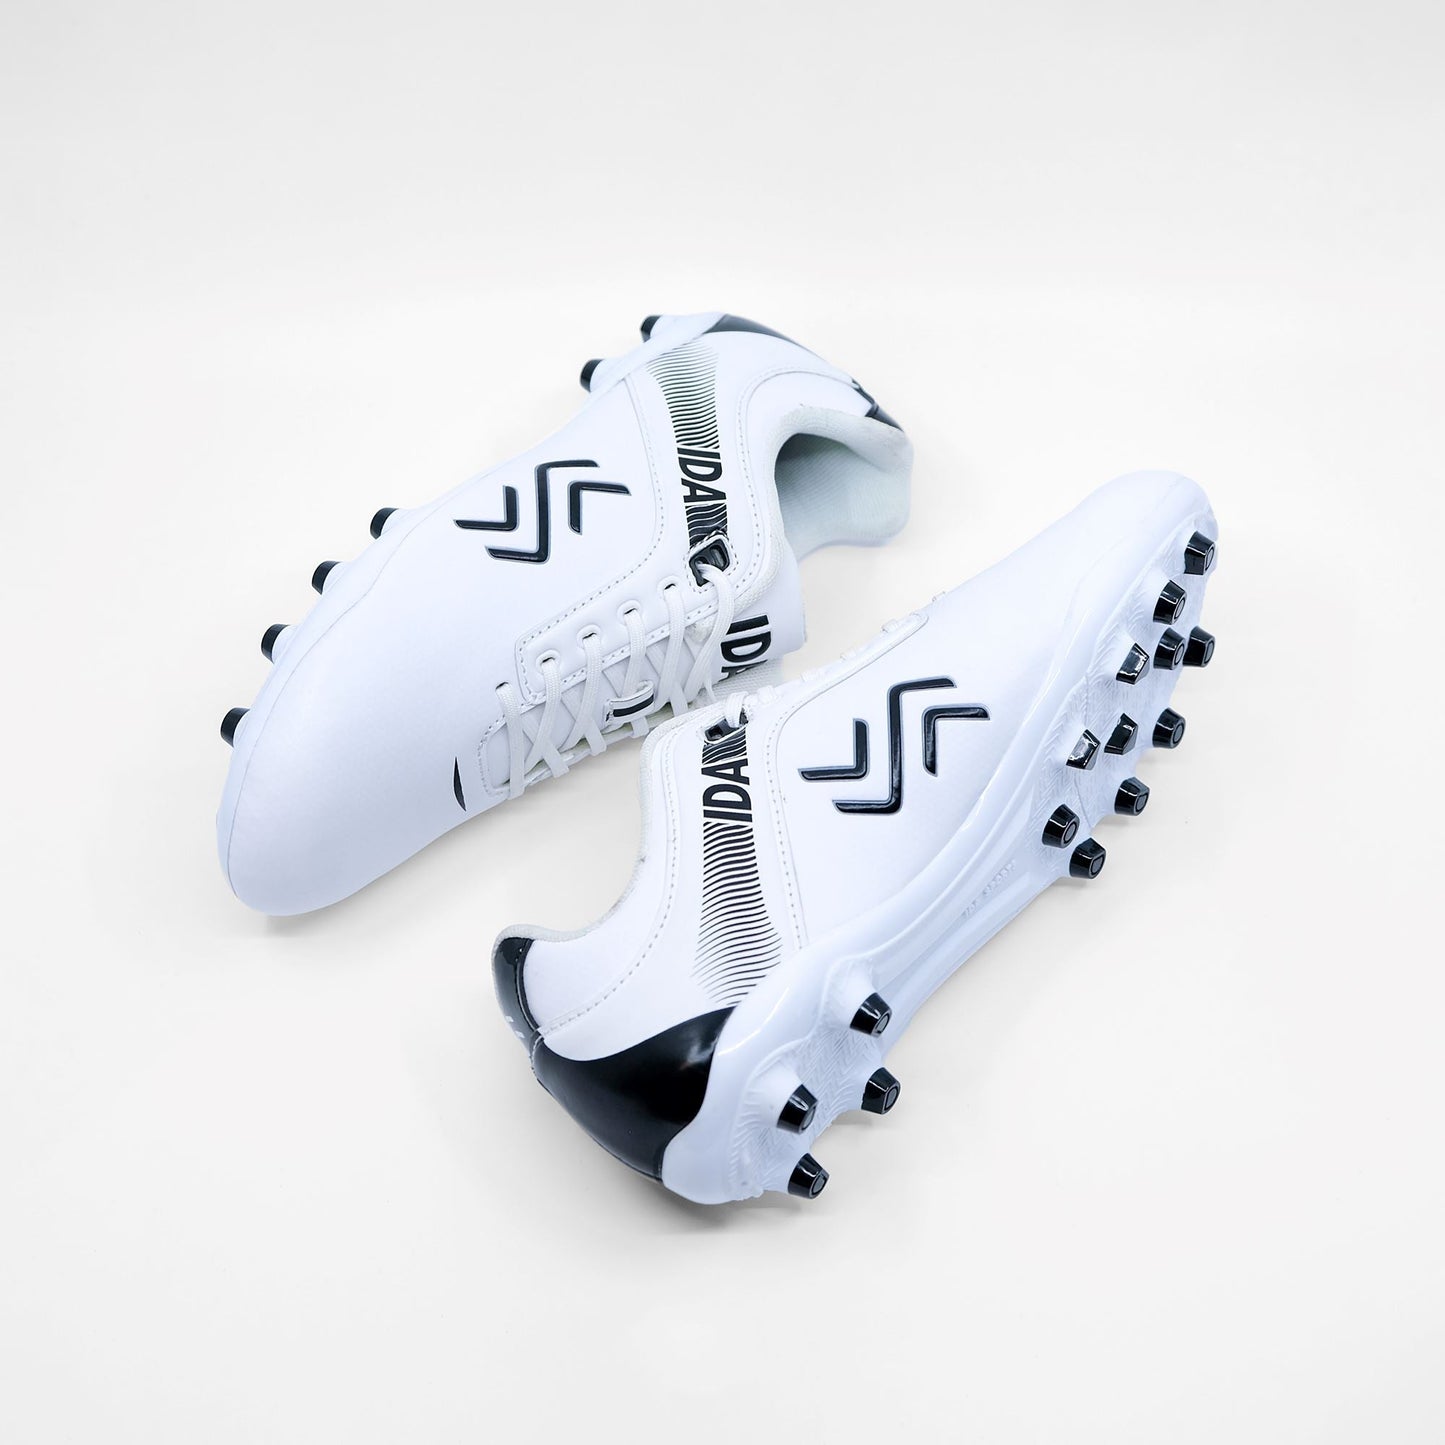 IDA Centra Women's Soccer Cleat, White, FG/AG, Firm Ground, Artificial Ground